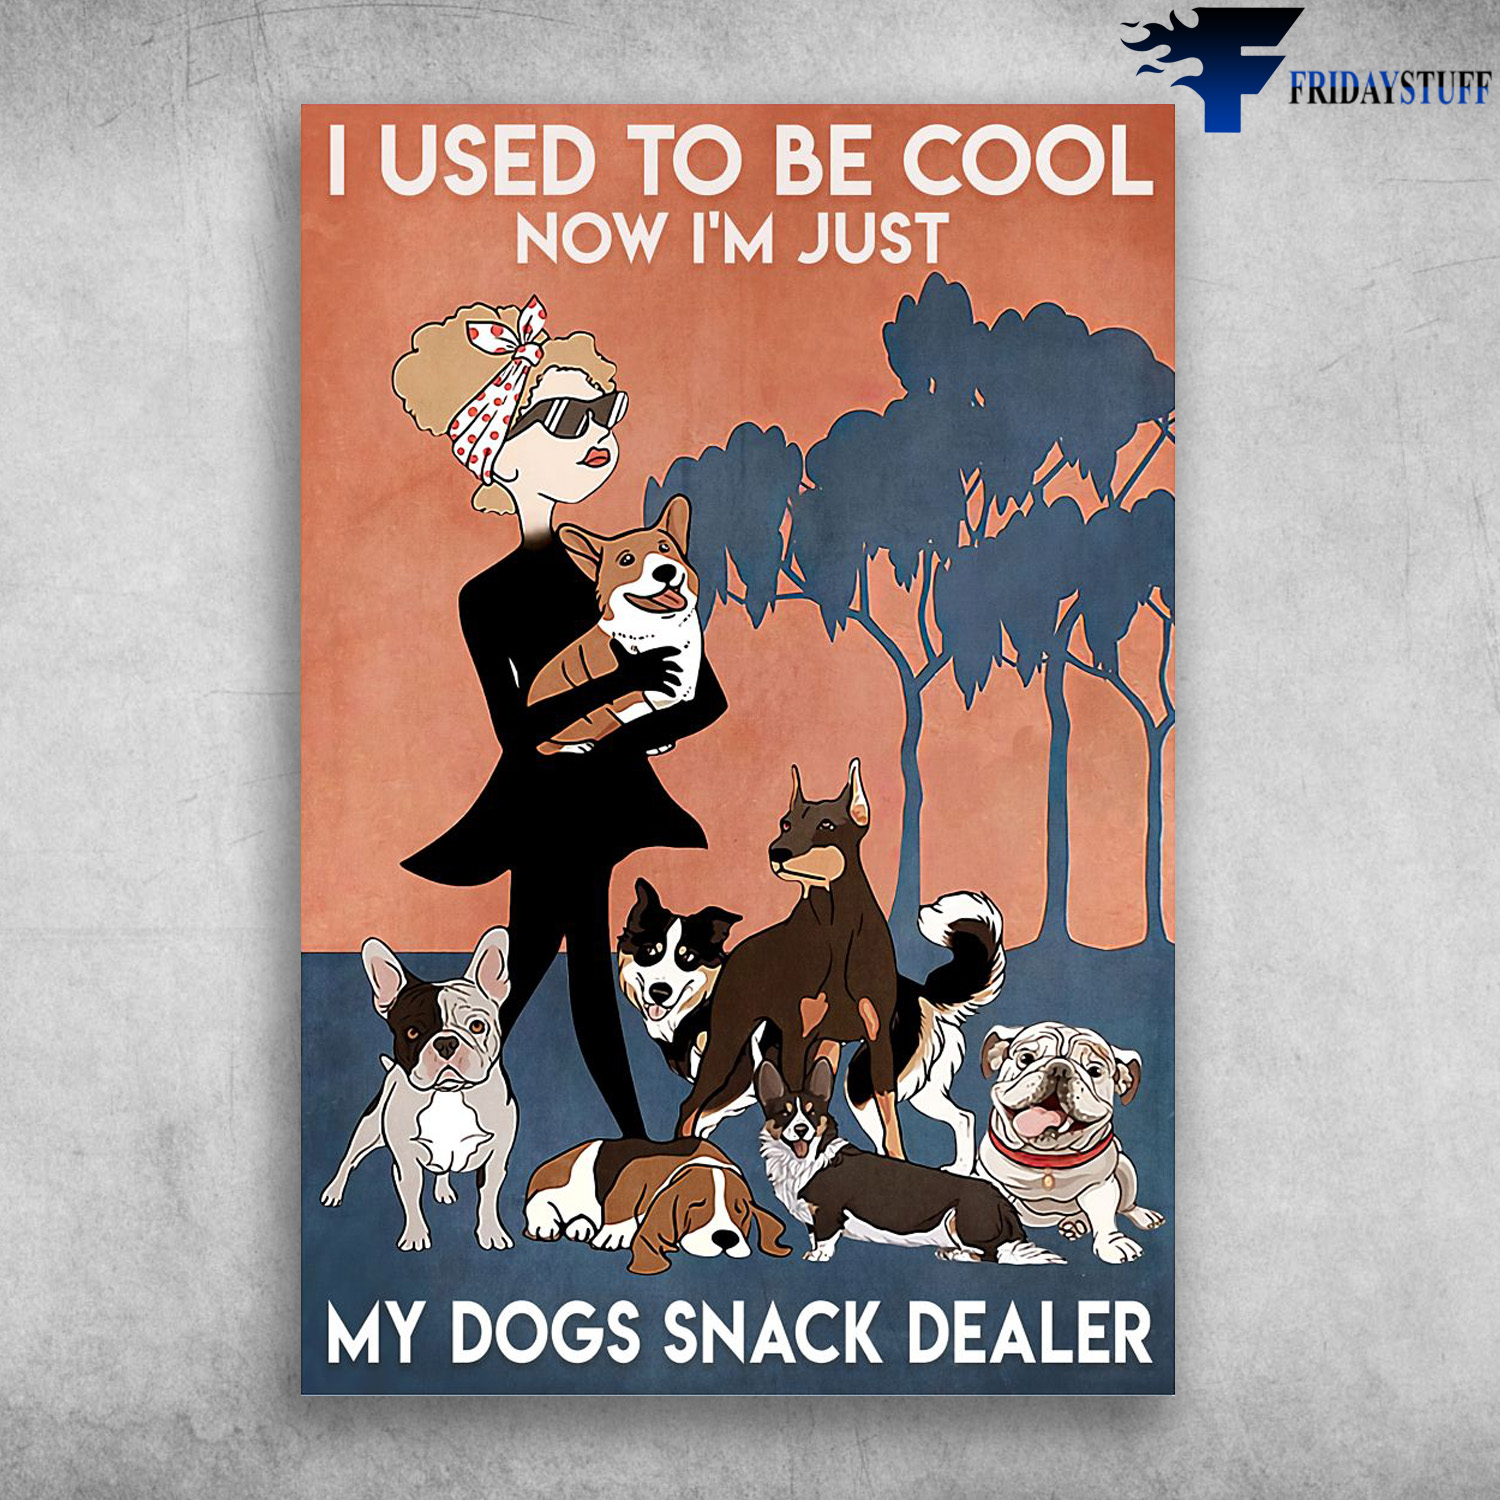 Girl Loves Dogs - I Used To Be Cool, Now I'm Just, My Dogs Snack Dealer